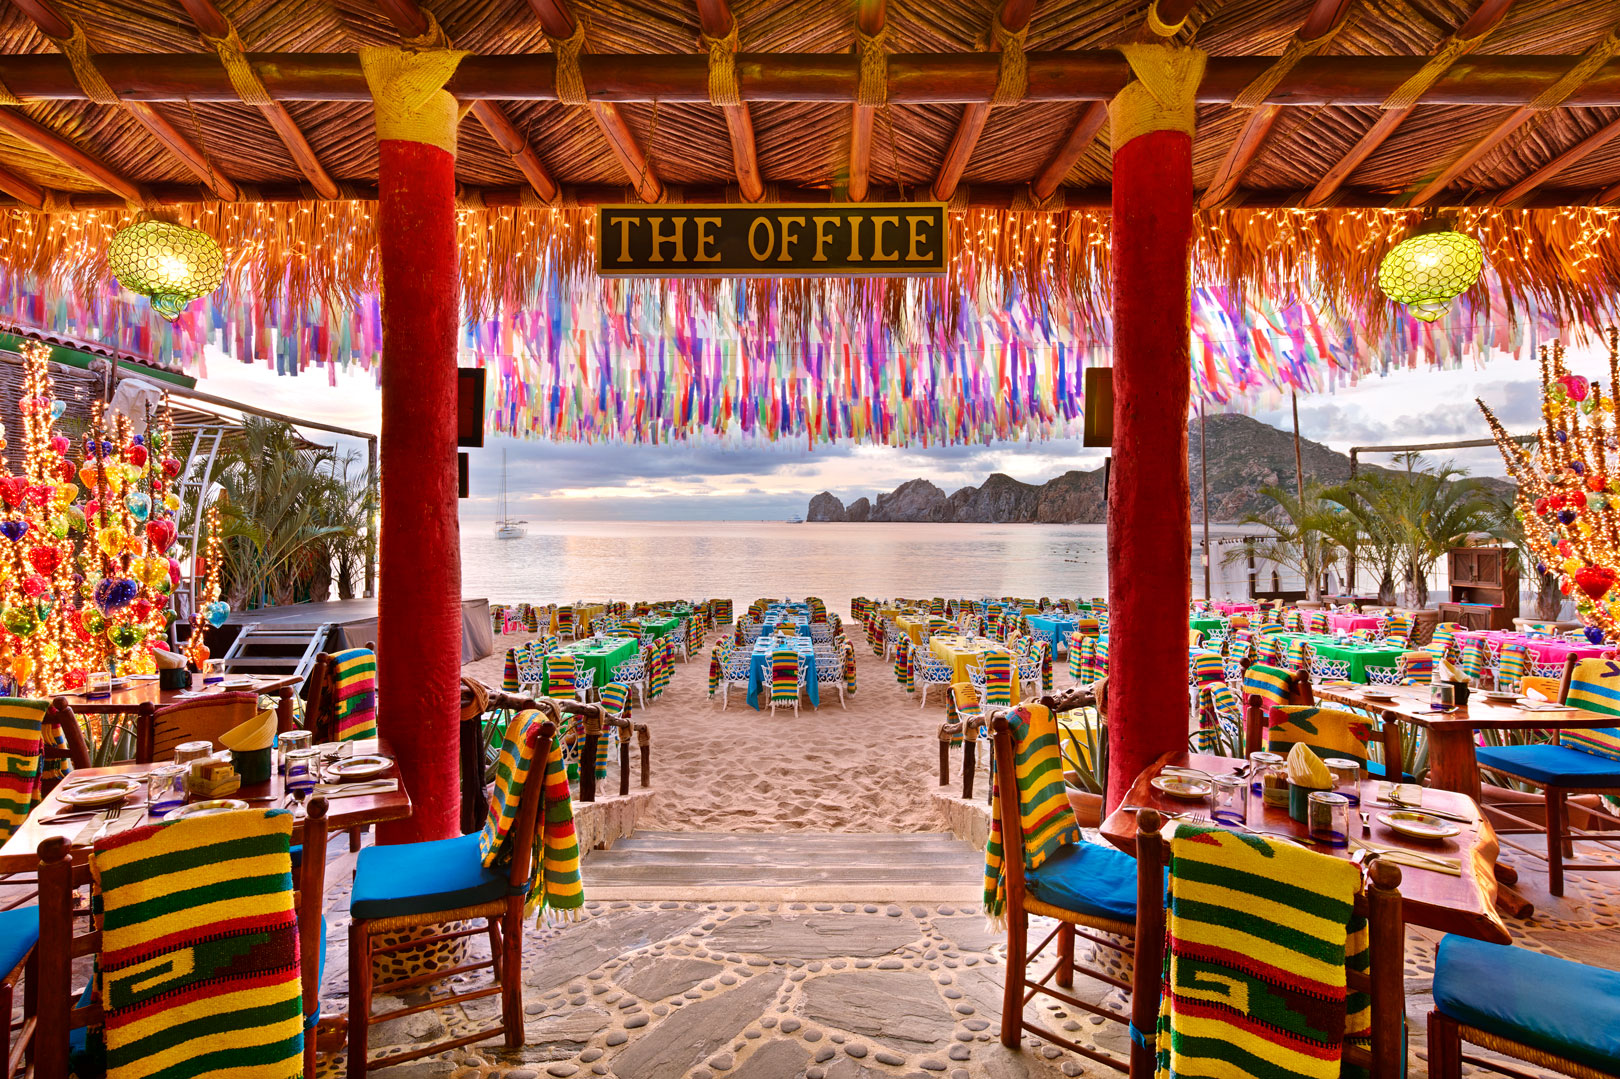 The Office on the Beach - The Best Mexican restaurant in Cabo San Lucas